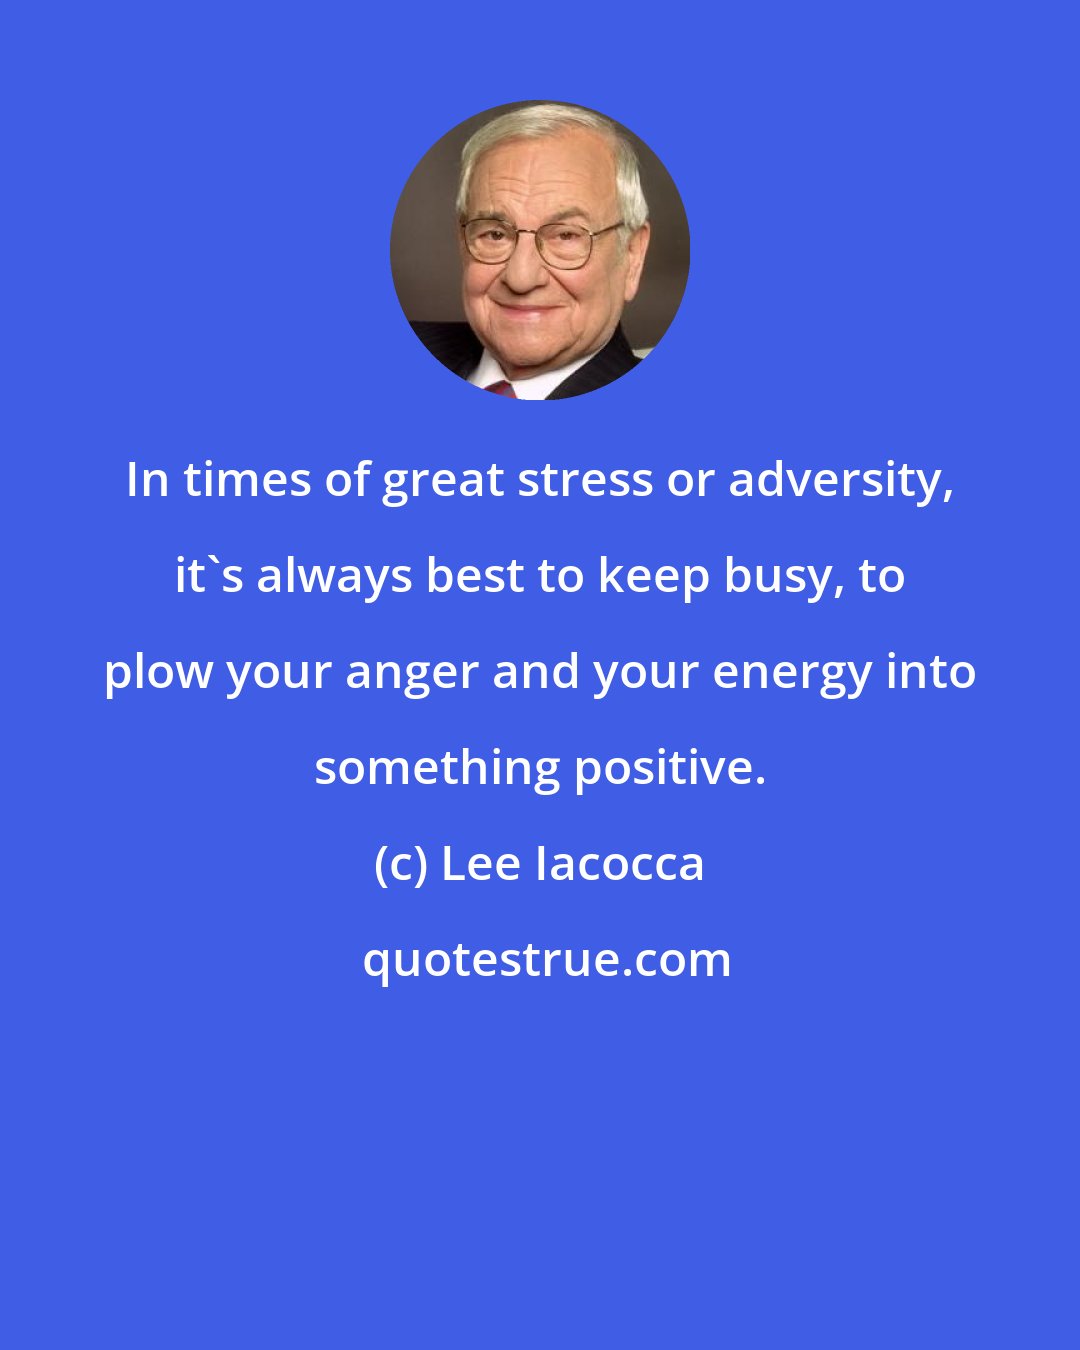 Lee Iacocca: In times of great stress or adversity, it's always best to keep busy, to plow your anger and your energy into something positive.